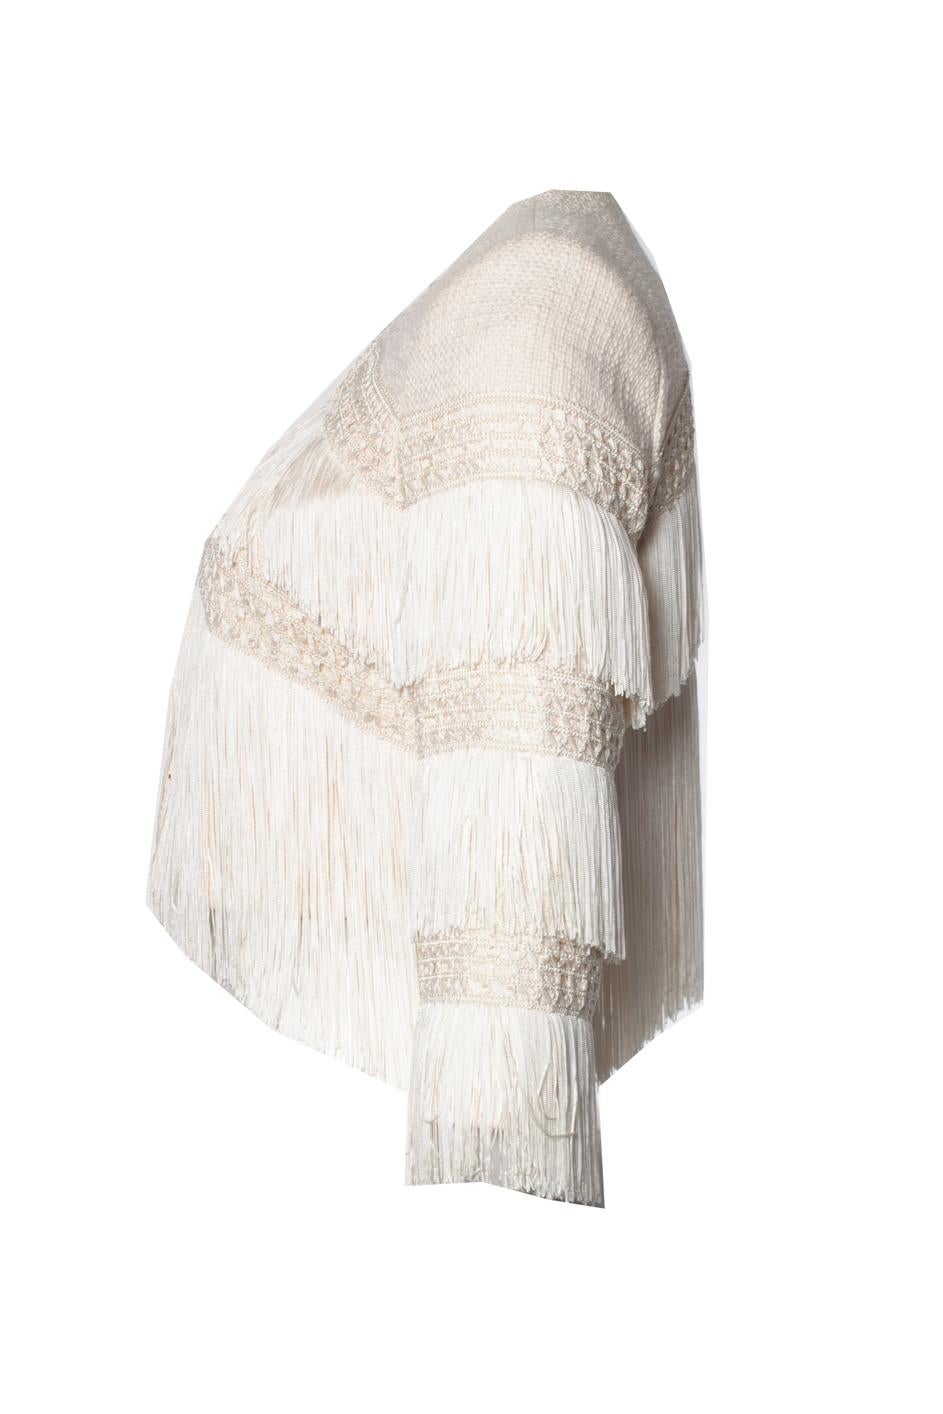 Elisabetta Franchi, Fringe Giacca blazer in cream. The item is new with tags.

• CONDITION: new with tags

• SIZE: IT42 - S

• MEASUREMENTS: length 43 cm, width 44 cm, waist 40 cm, shoulder width 37 cm, sleeve length 45 cm

• MATERIAL: 100% cotton